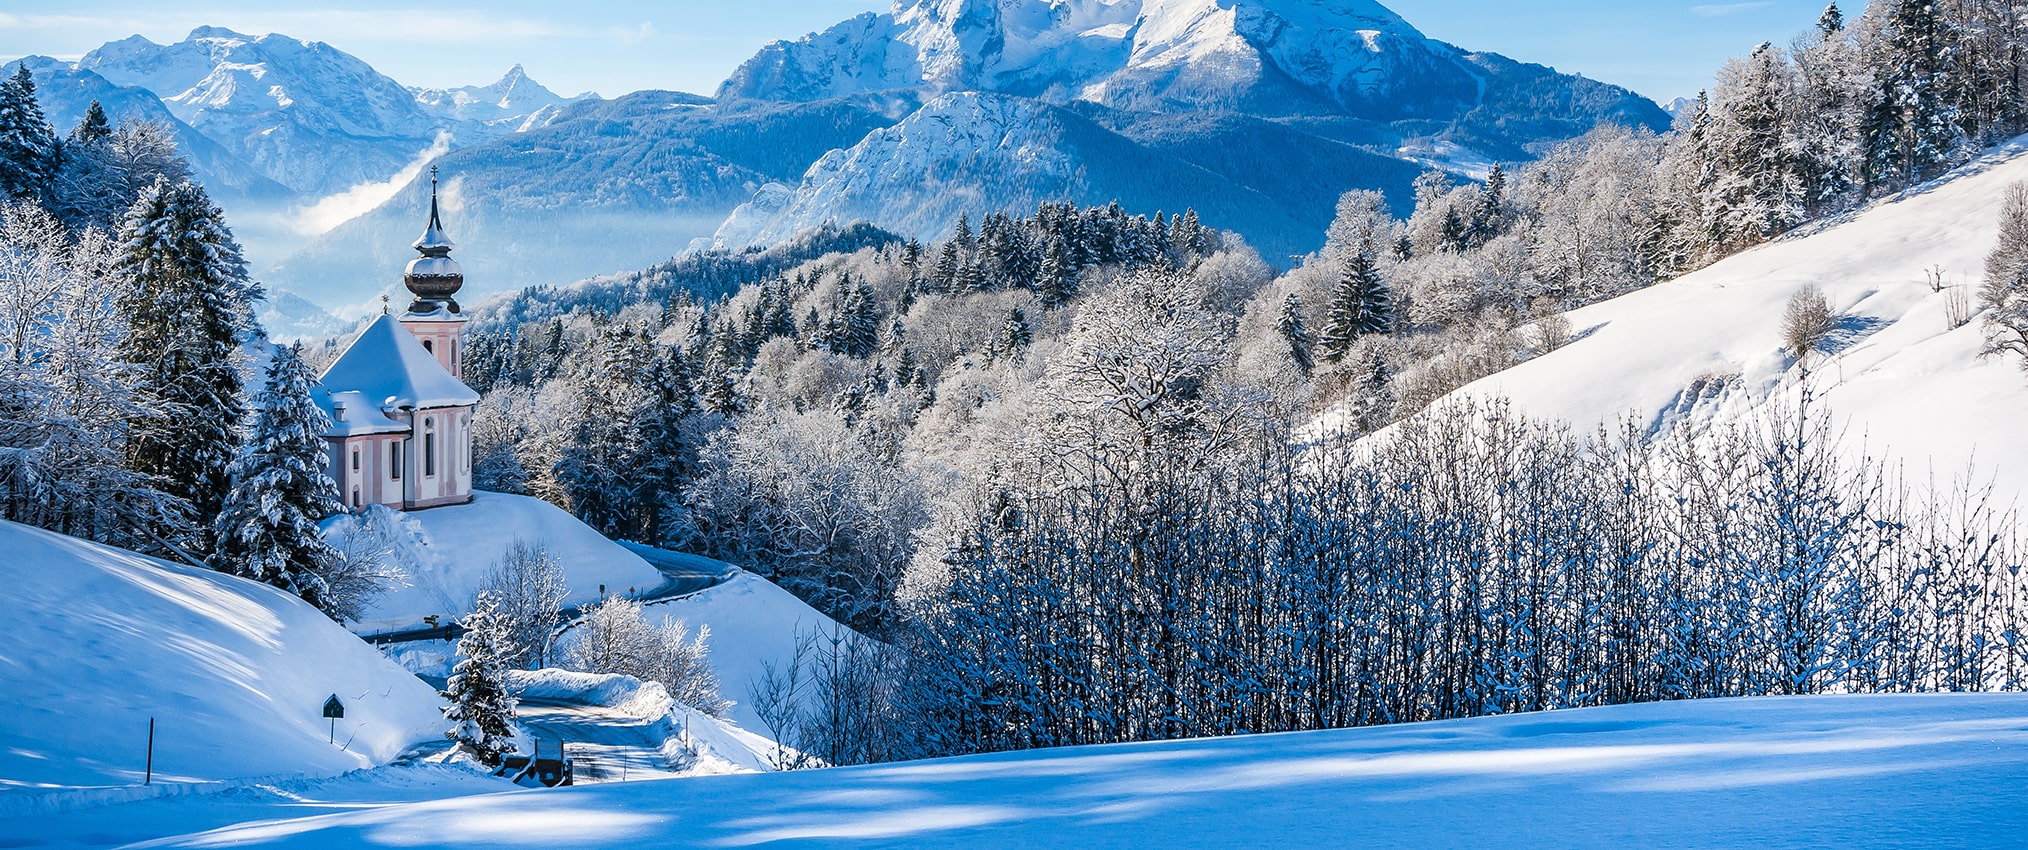 Winter Photography Tips for Landscape Photographers